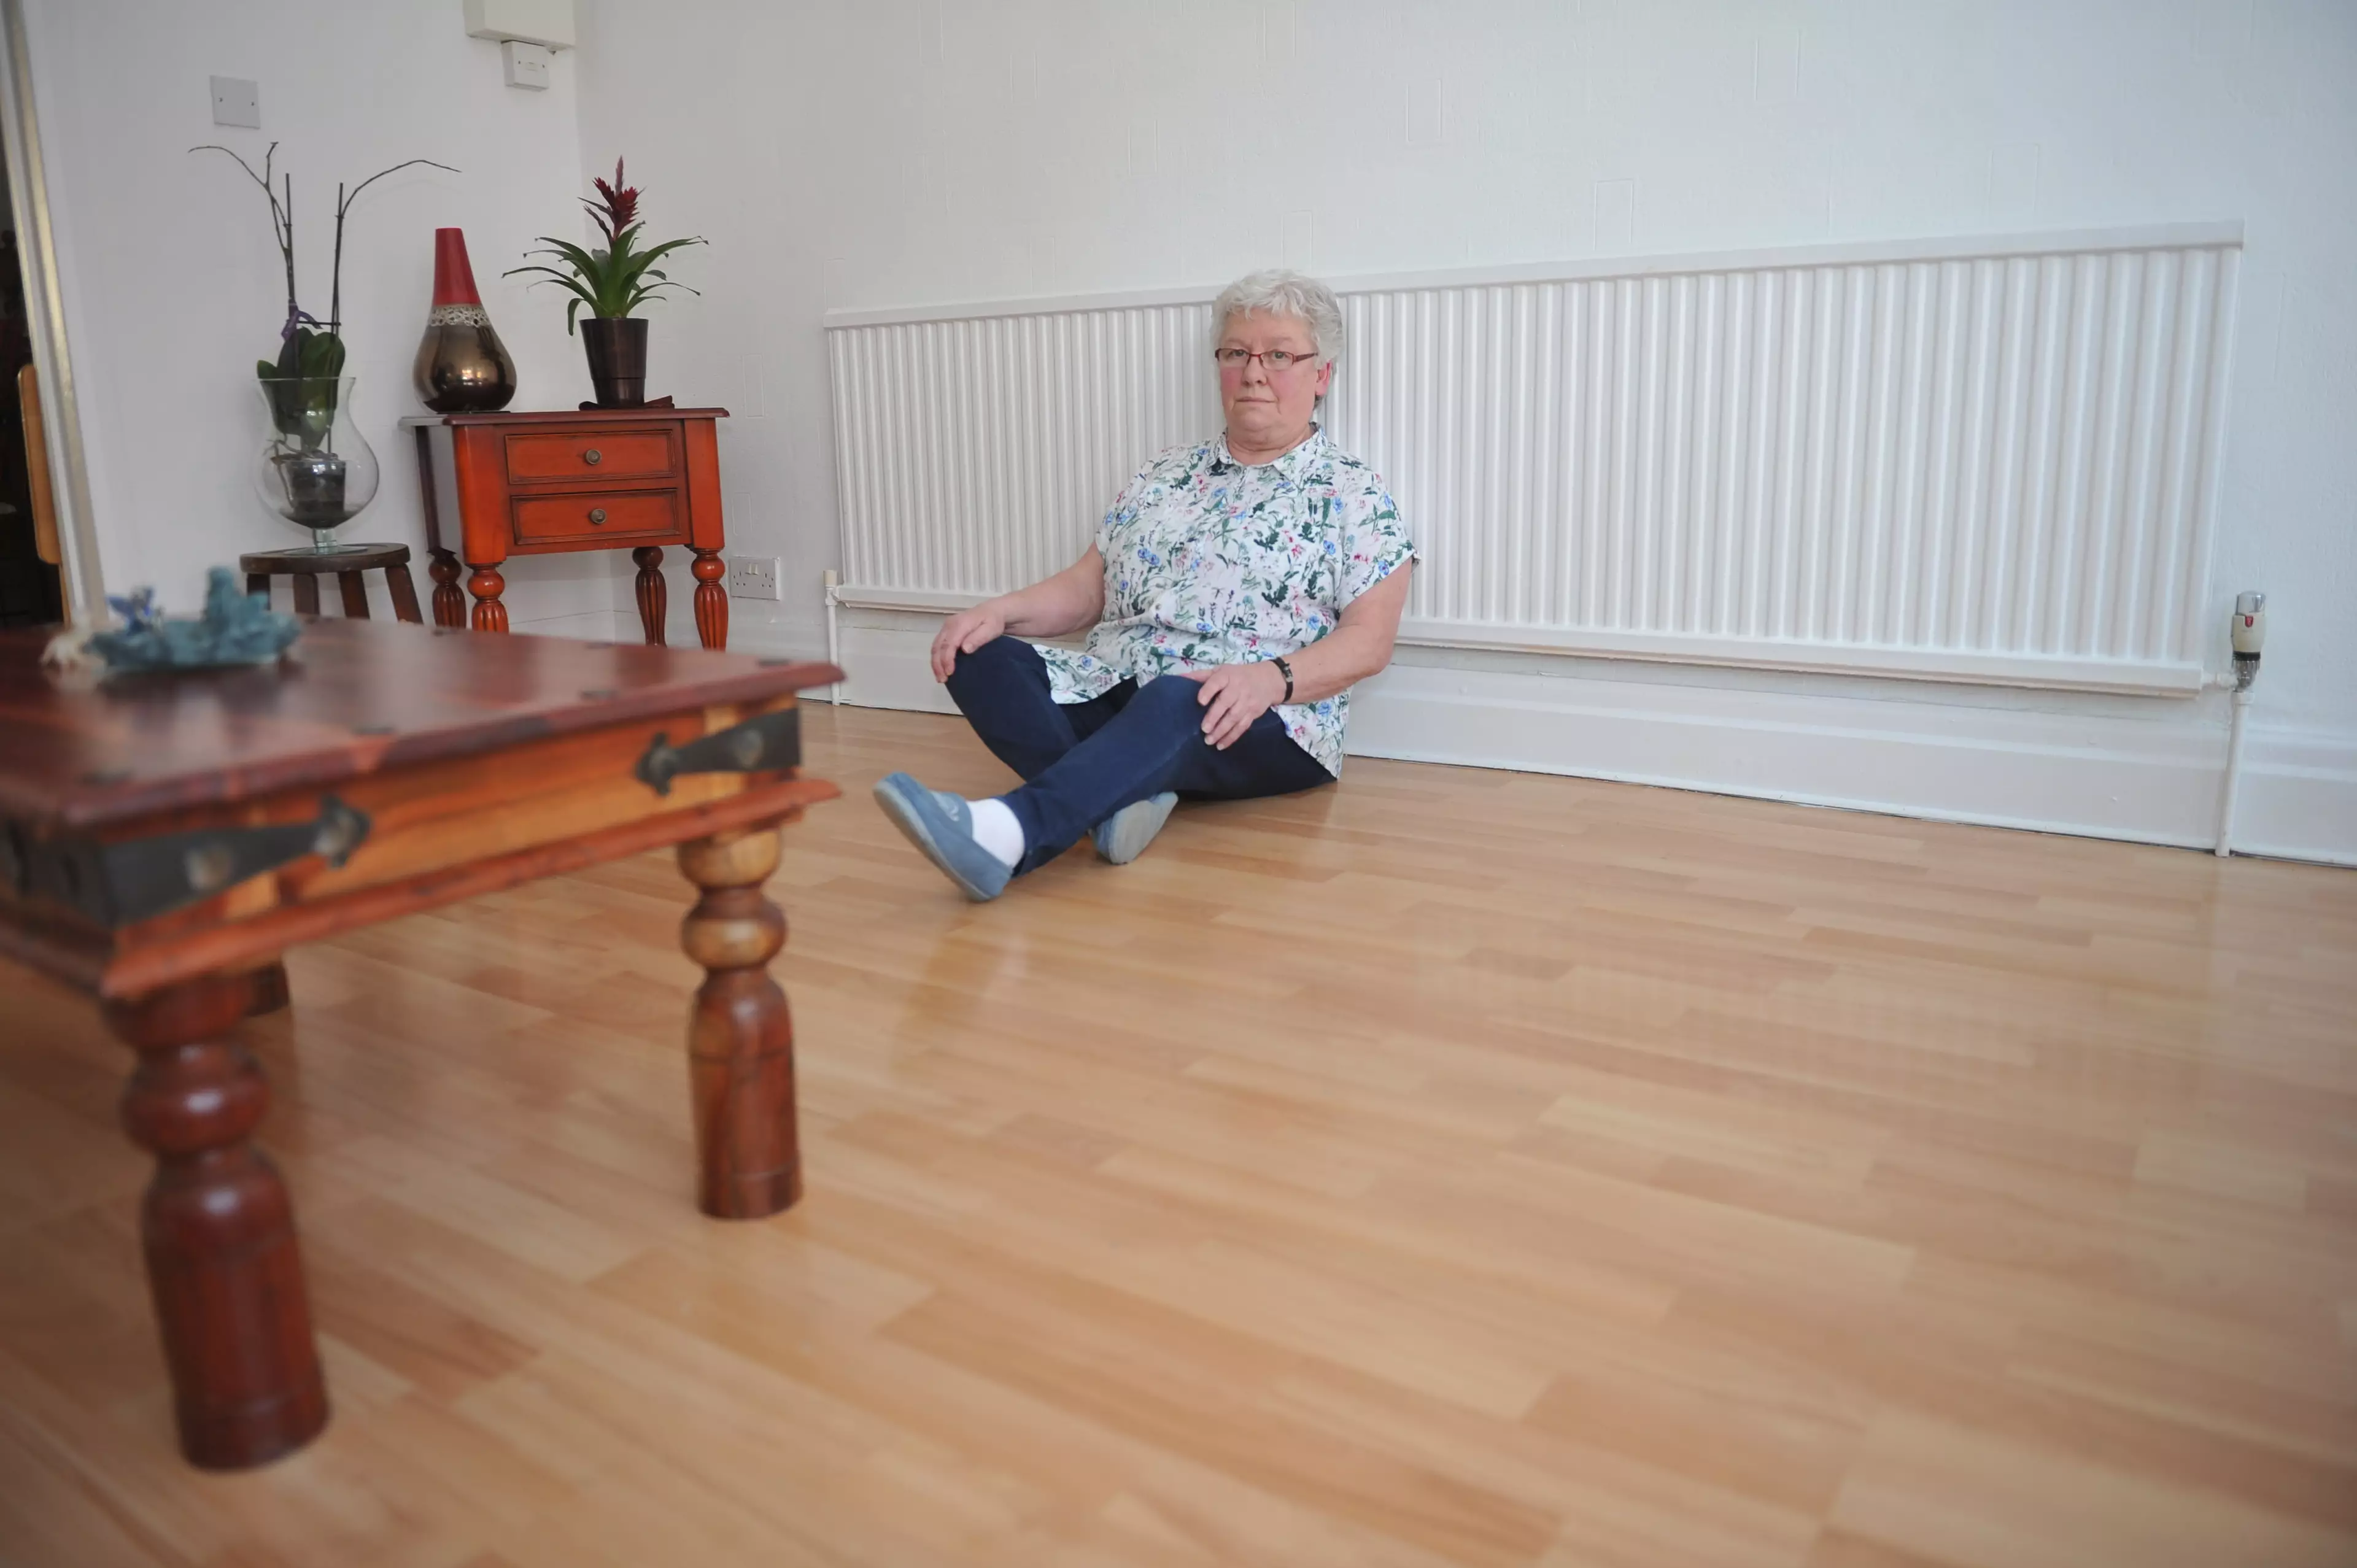 Gillian Griffin says she's left with back pain after having to sit on a wooden dining chair.